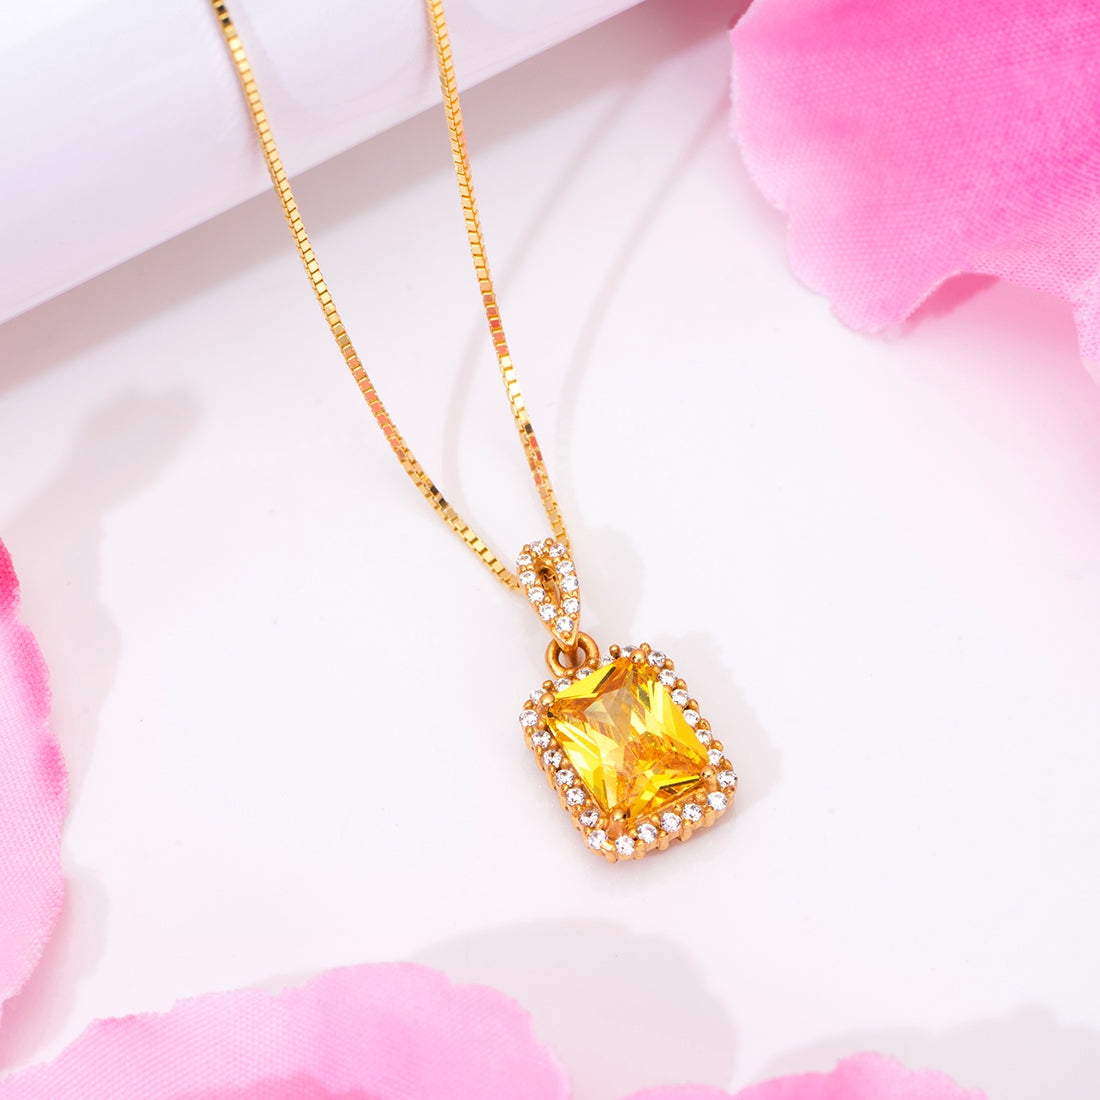 Golden Radiance 925 Sterling Silver Gold-Plated CZ Pendant with Chain